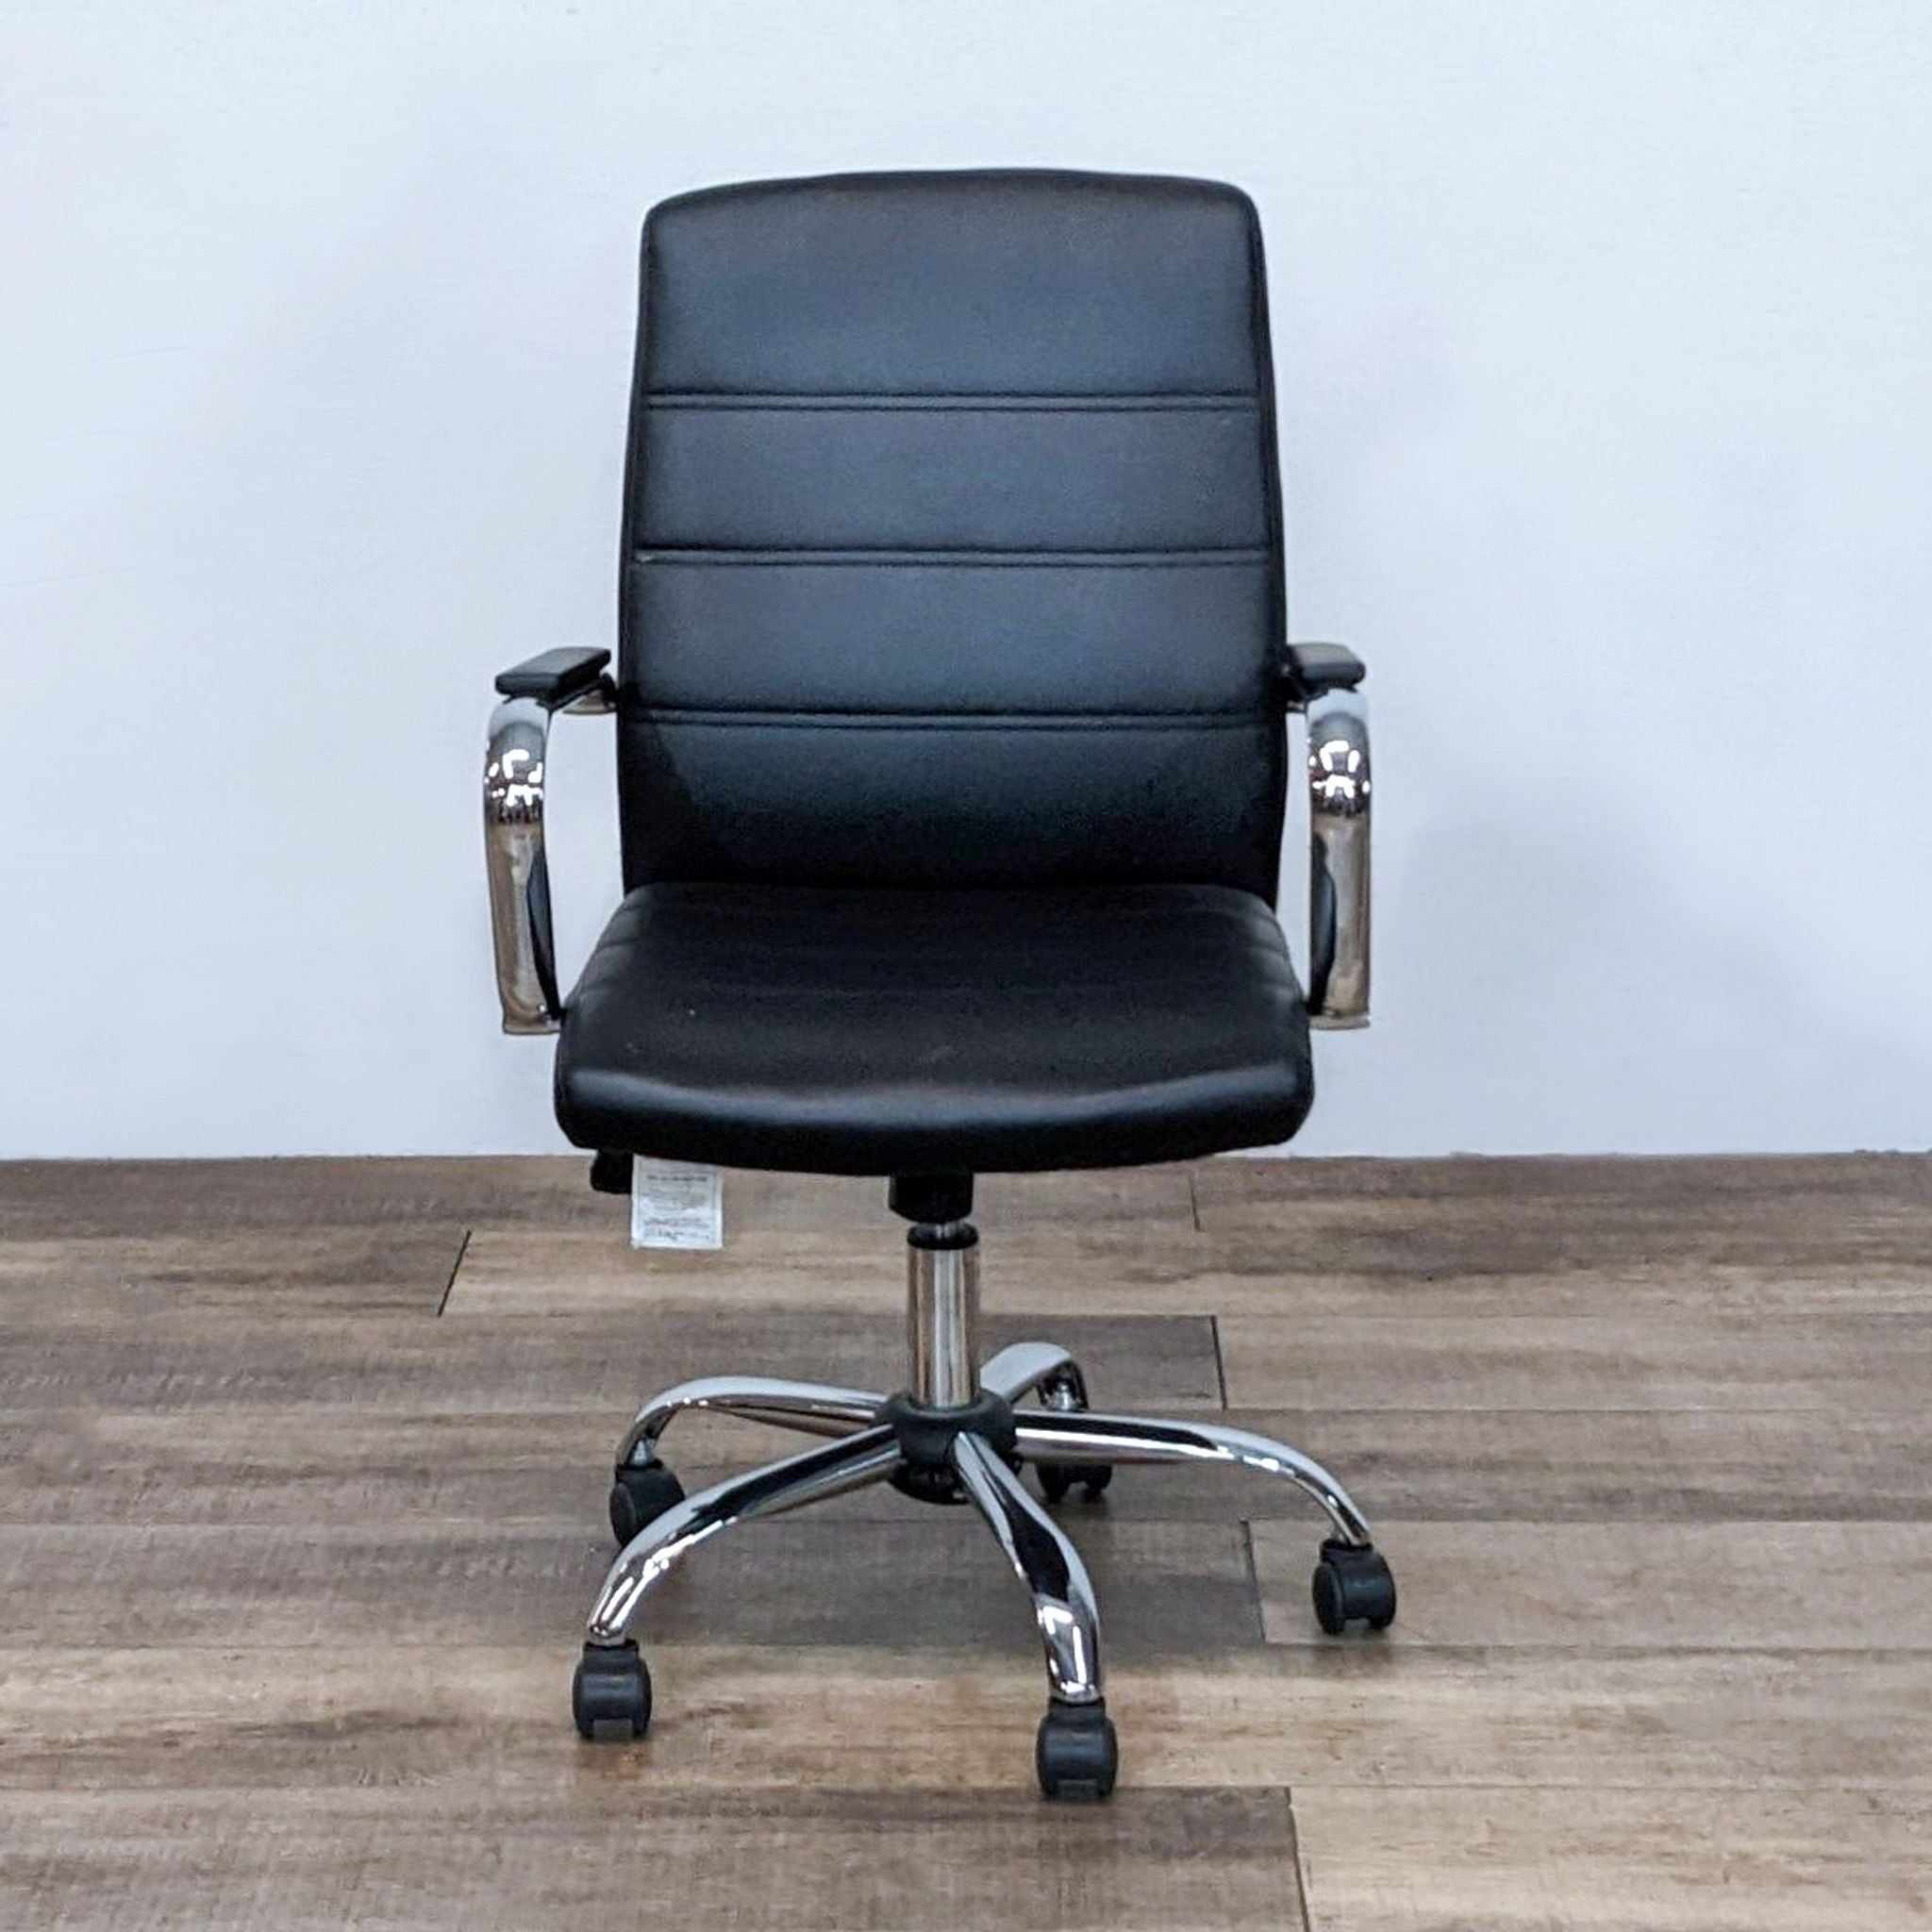 Alt text 1: Reperch branded mid-back office chair in black faux leather, with chrome arms and base, featuring tilt-lock and height adjustment.